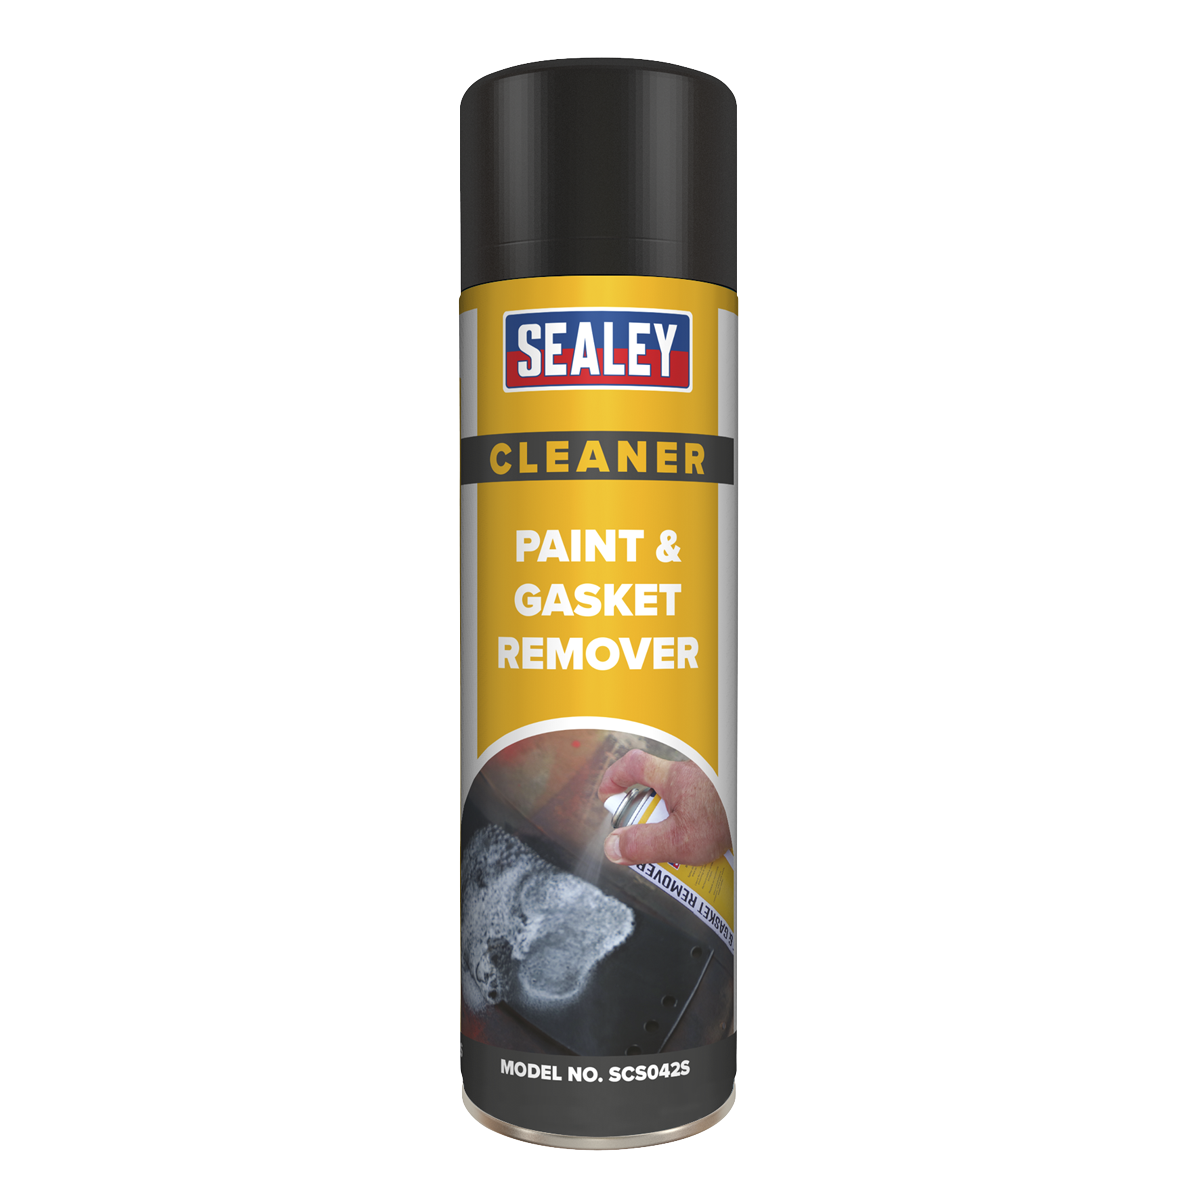 Sealey SCS042S Paint & Gasket Remover 500ml